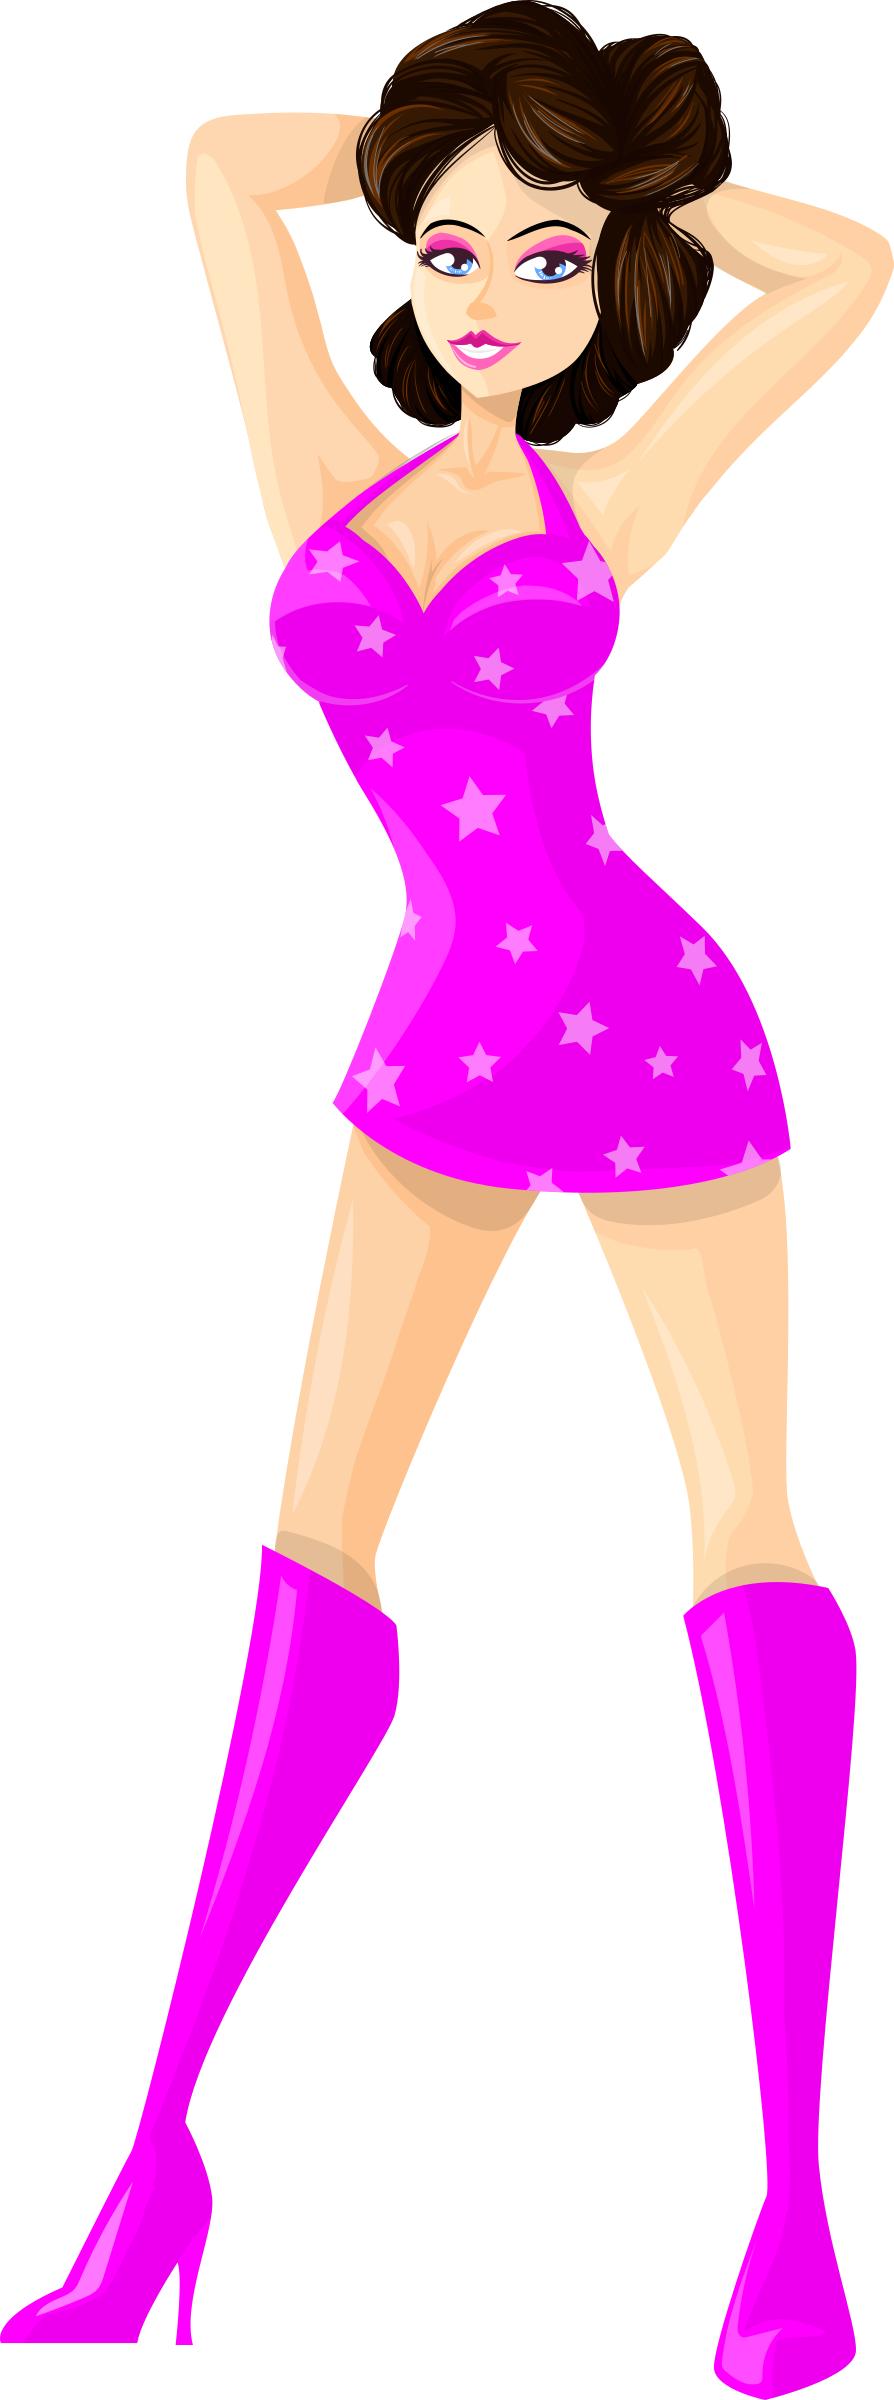 Young lady 2 (brown hair, light skin, starry dress #6) png